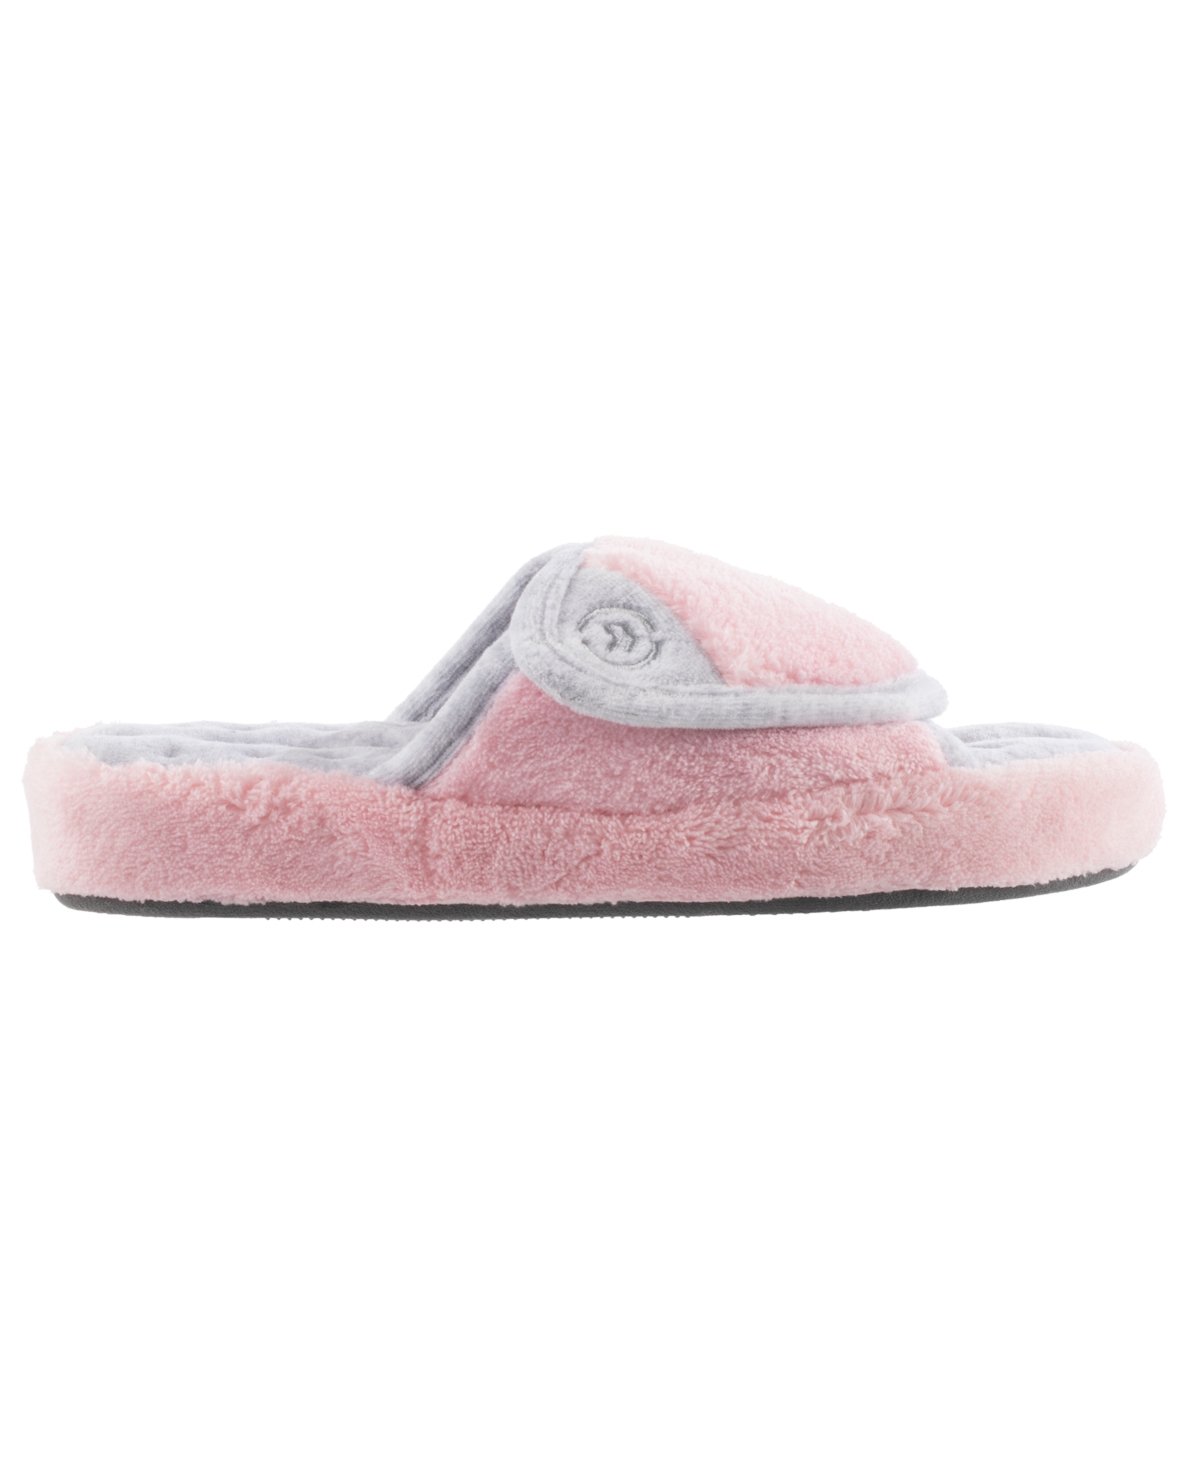 Isotoner Women's Microterry Pillowstep Slide Slipper, Online Only - Blue Moon